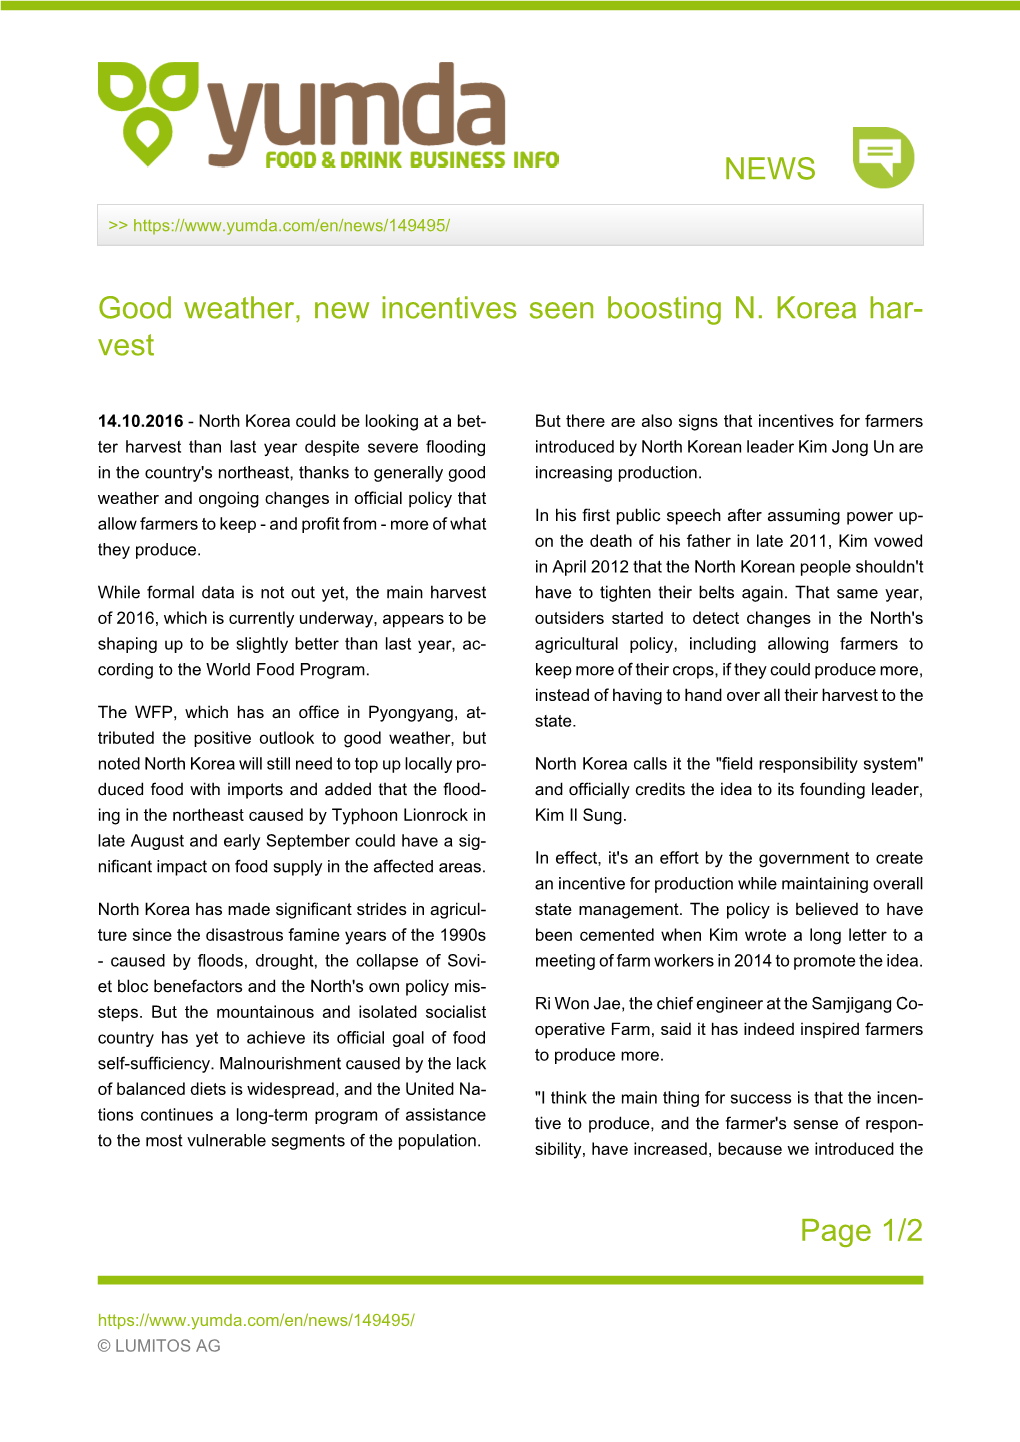 NEWS Page 1/2 Good Weather, New Incentives Seen